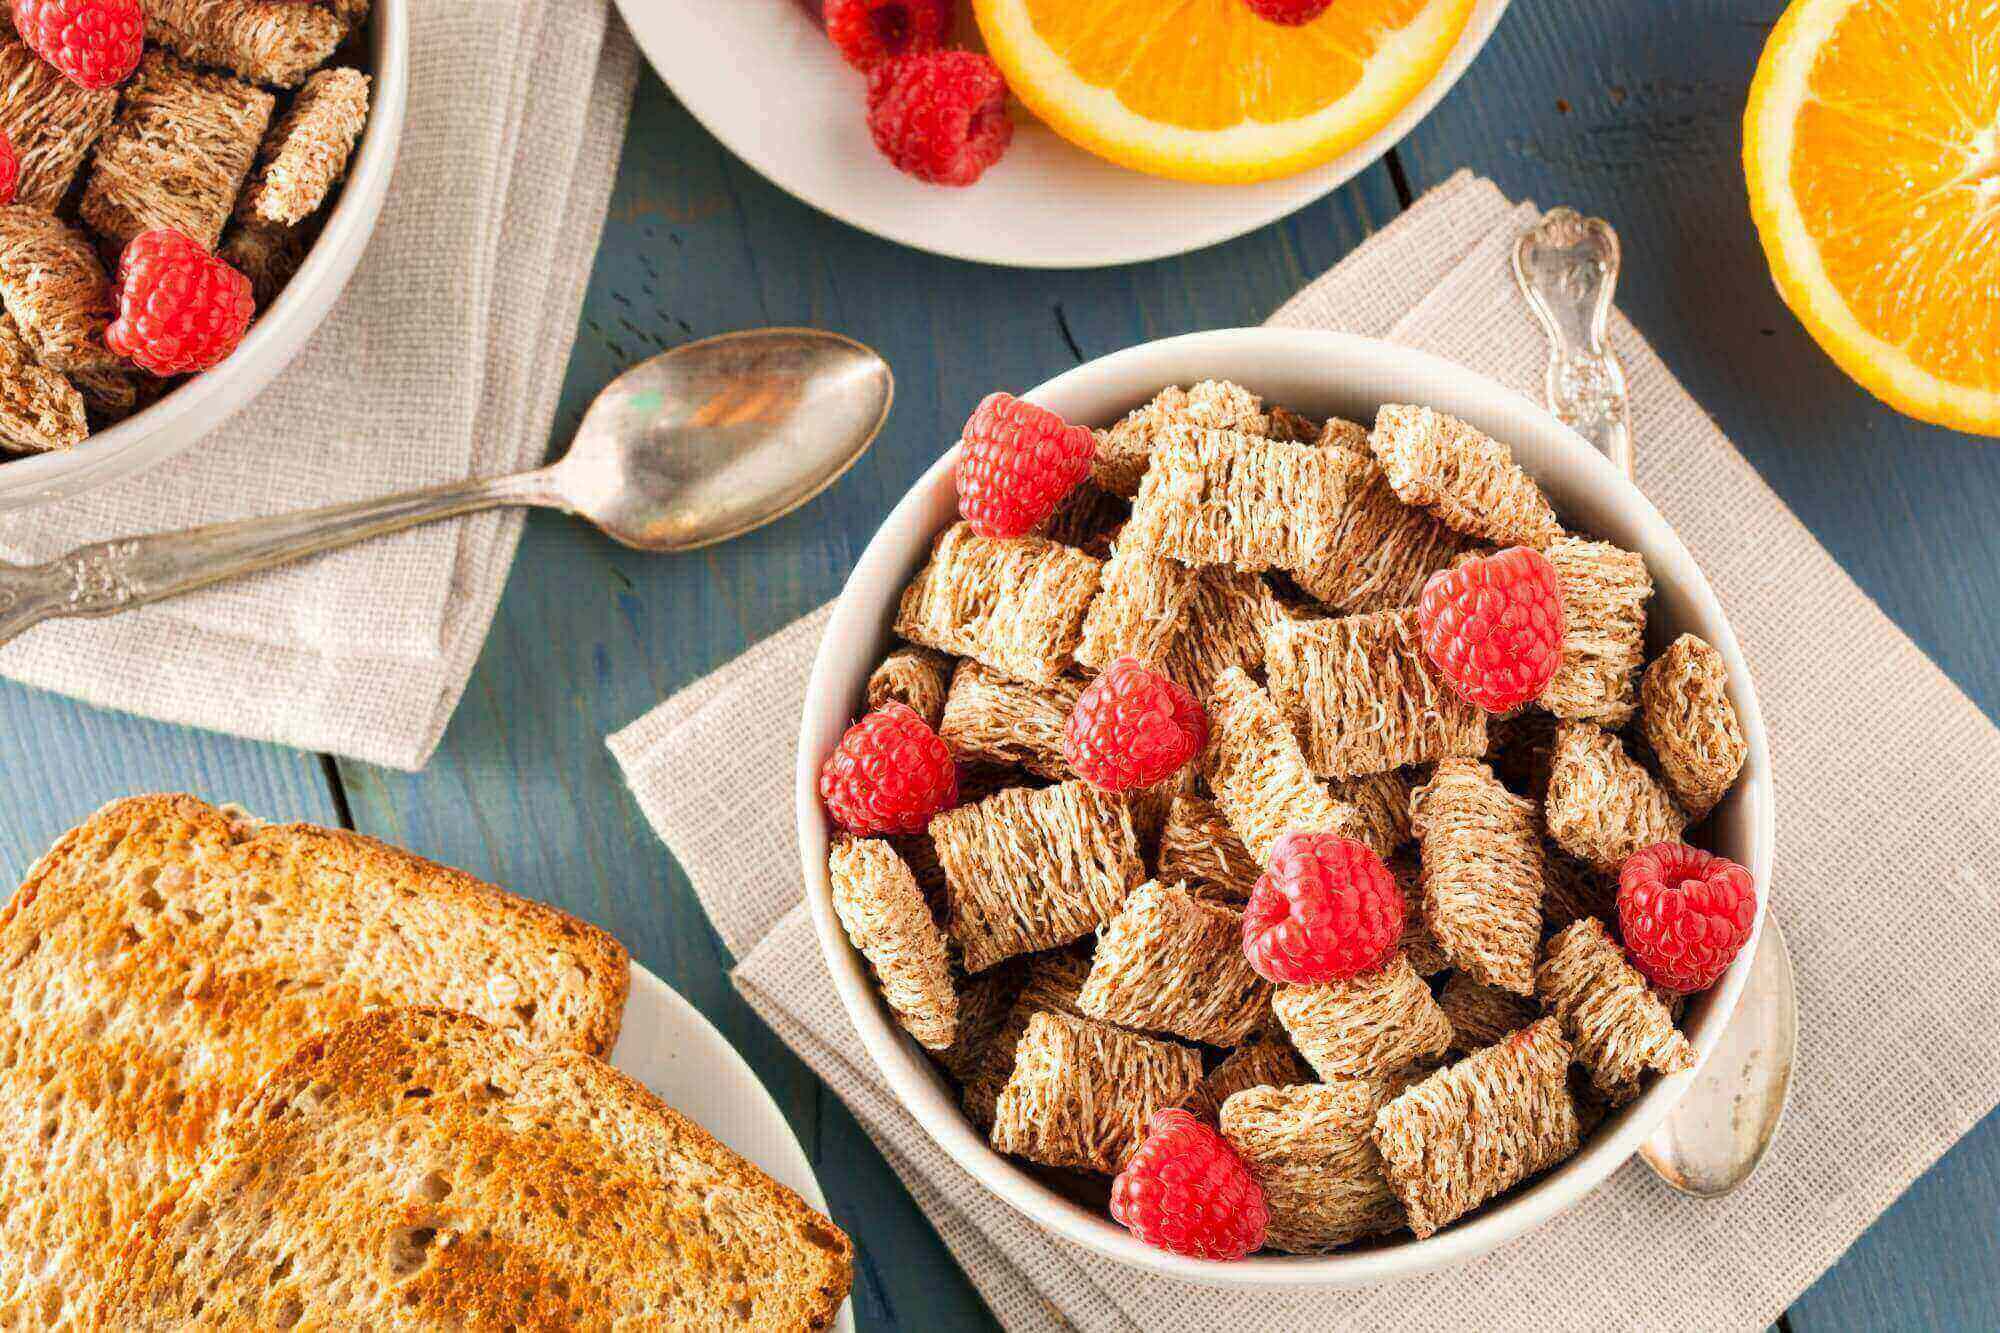 20-shredded-wheat-nutritional-facts